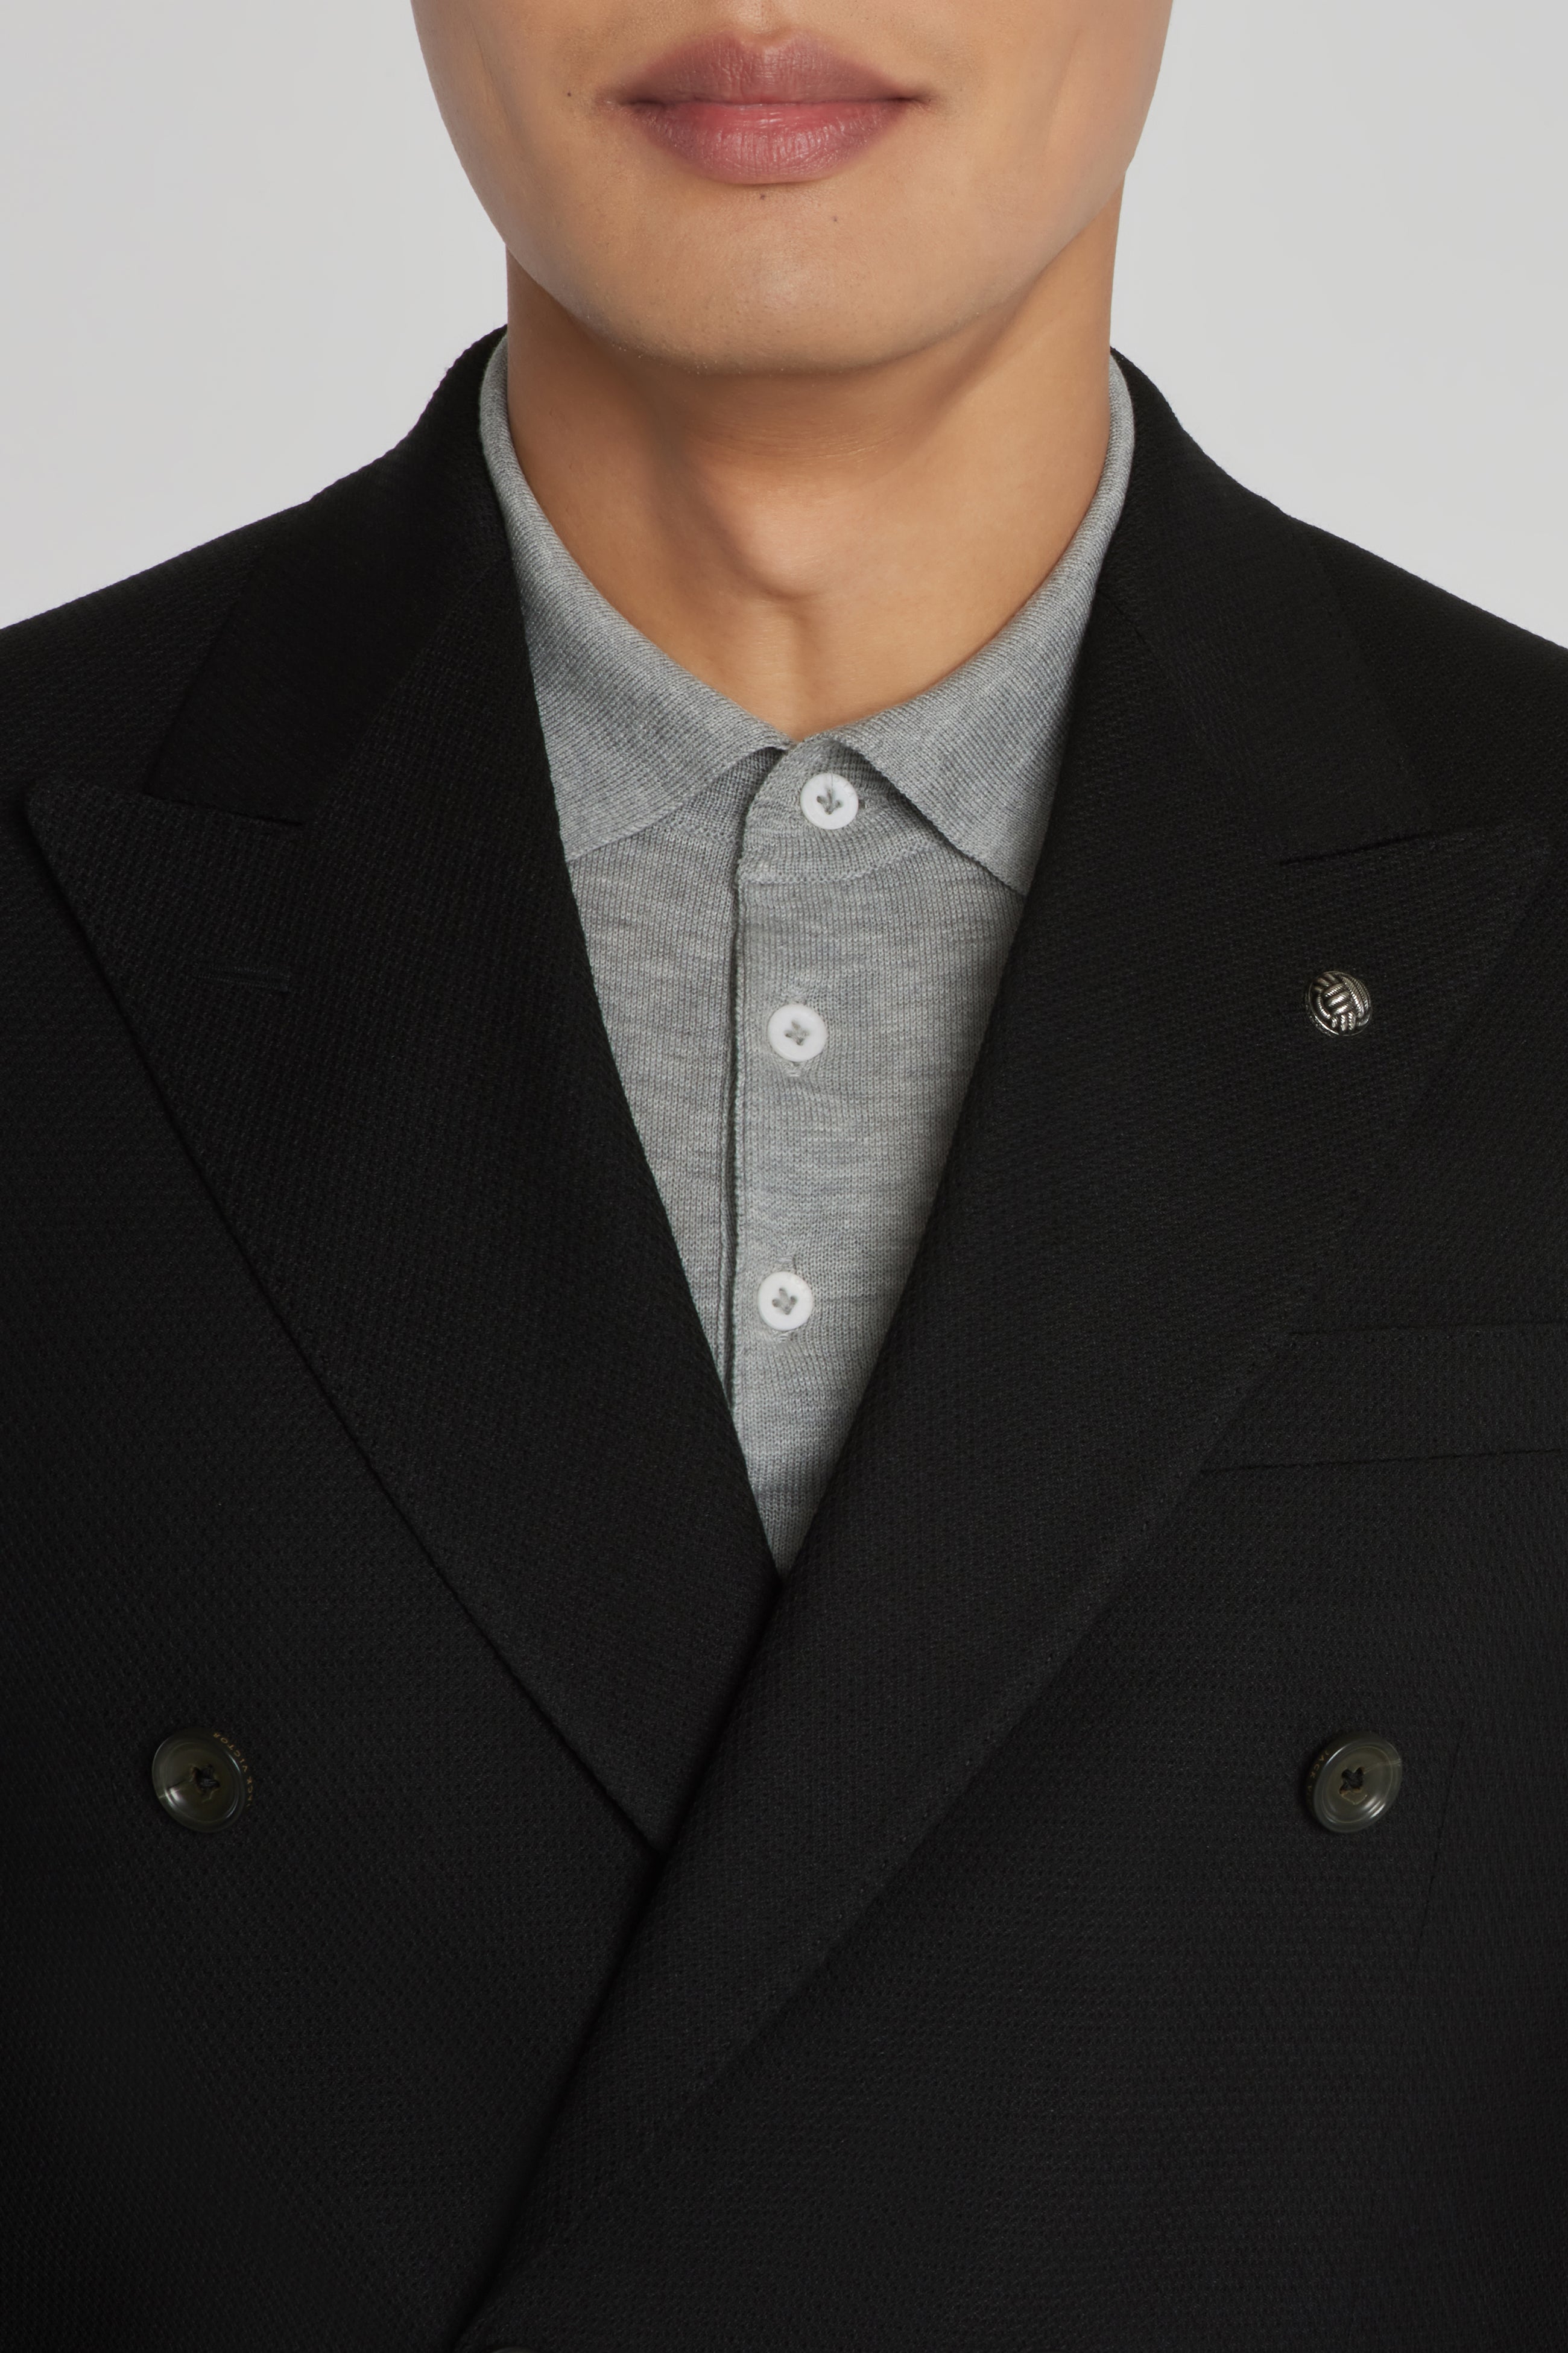 Louis Vuitton Classic Single-Breasted Coat BLACK. Size 50